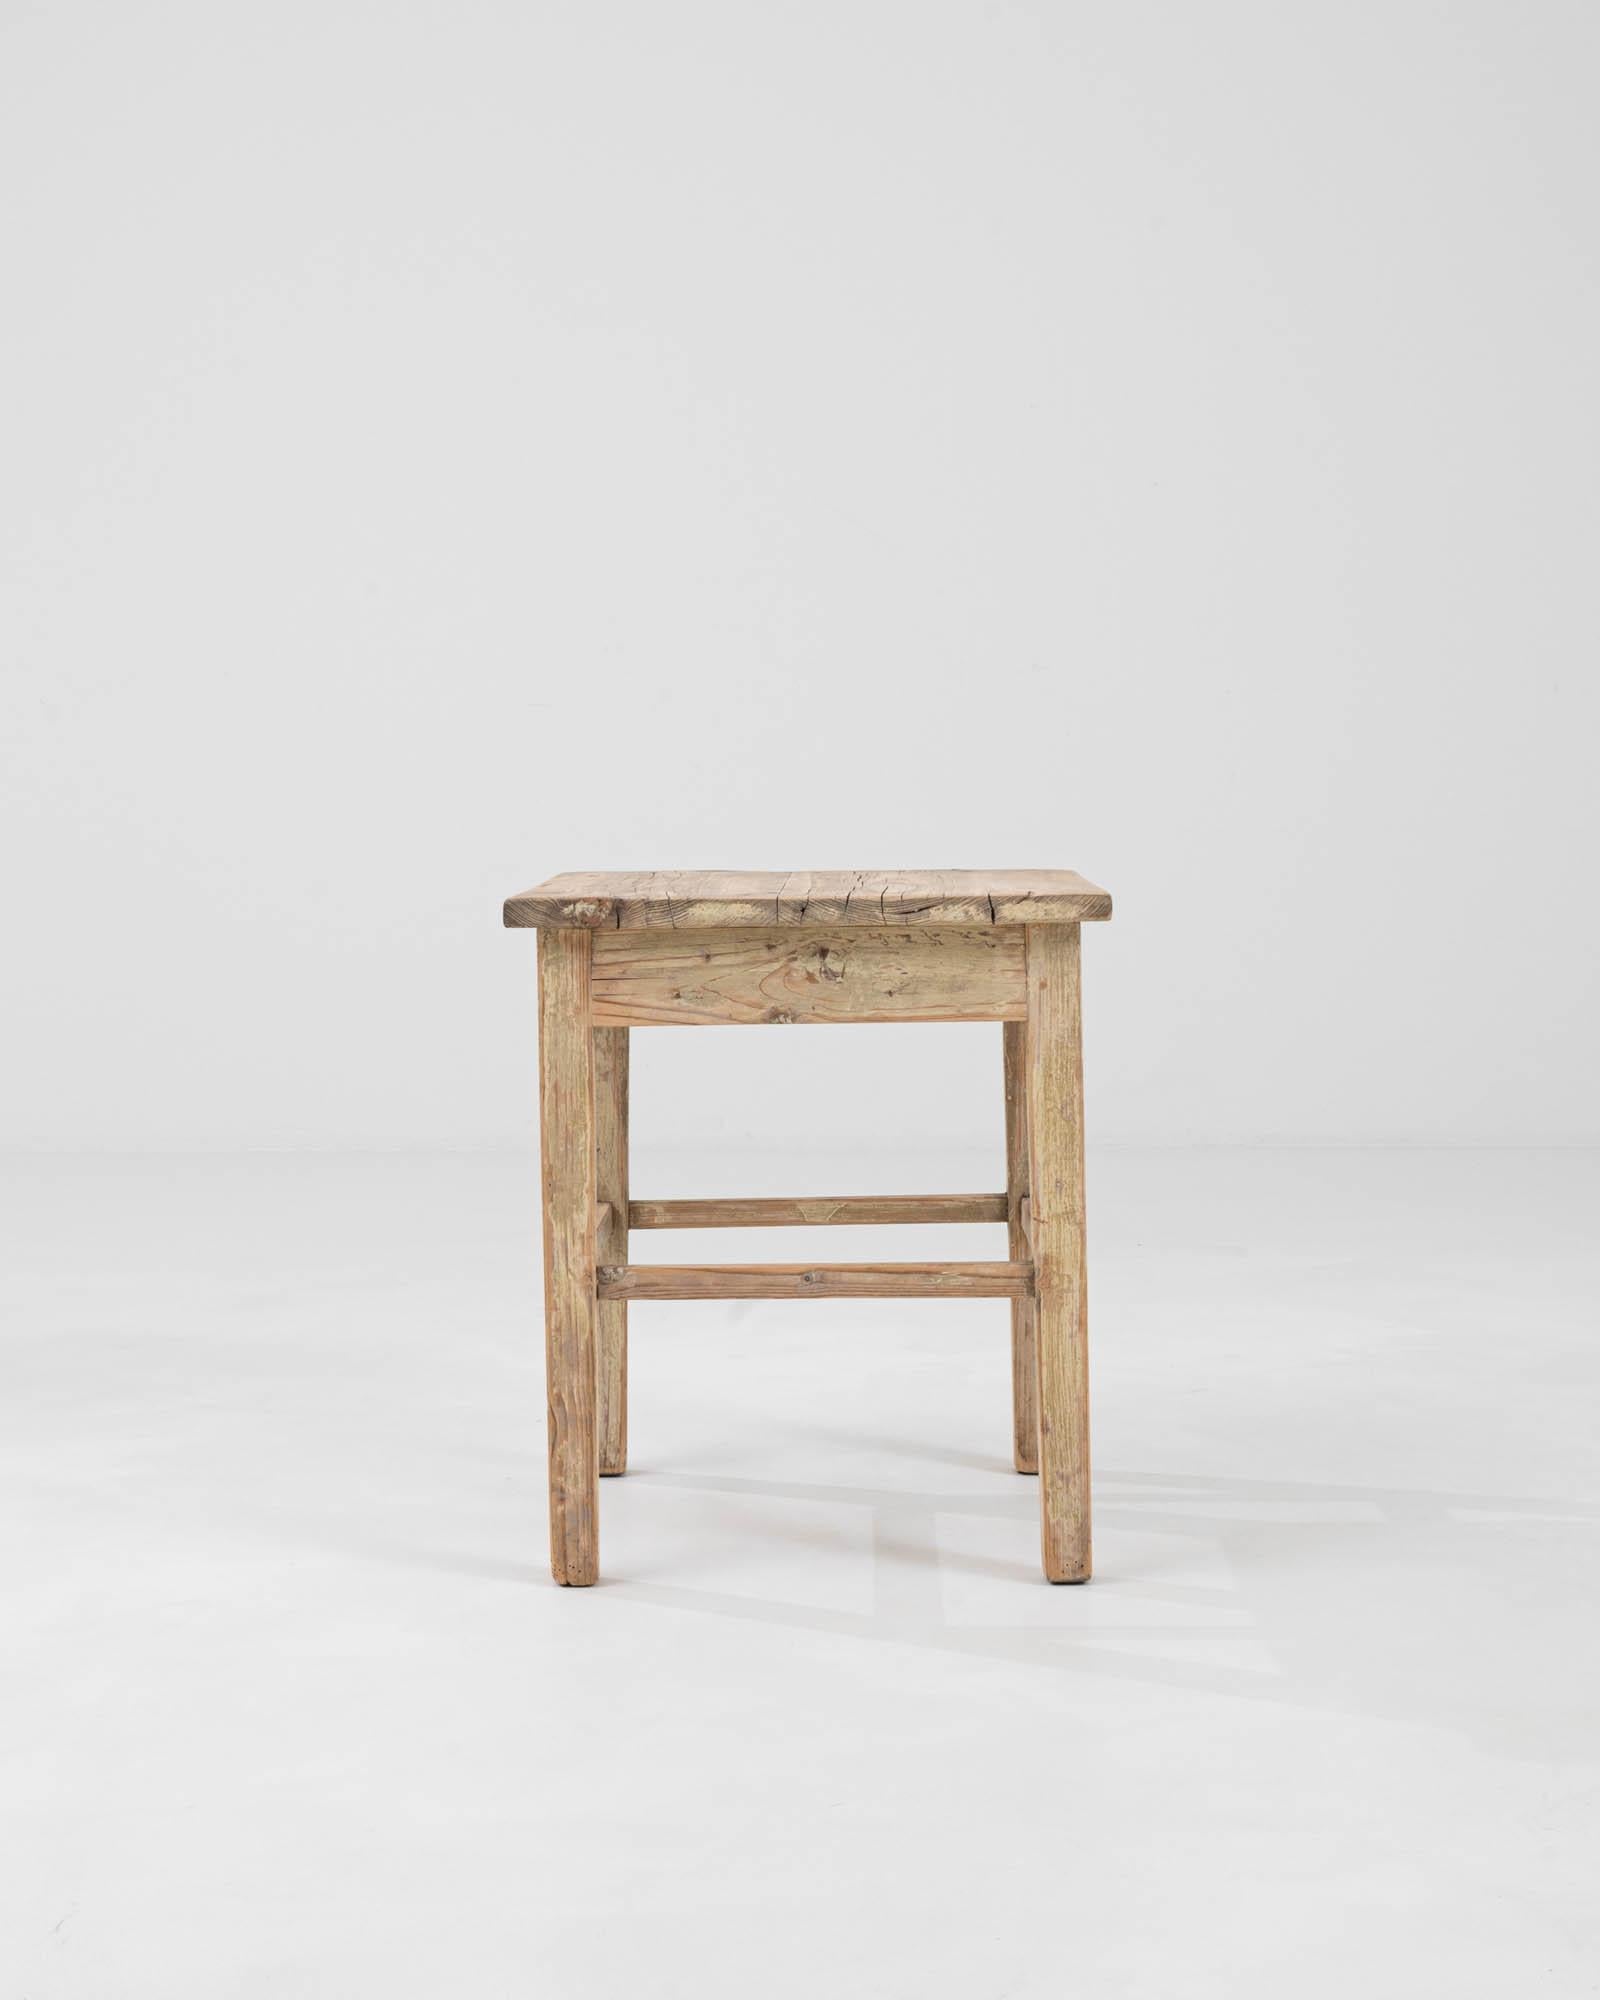 This Early 20th Century Central European wood patinated stool is a testament to the timeless beauty and durability of artisanal craftsmanship. Its raw and natural finish highlights the authentic wood grains and character marks, imbuing this piece